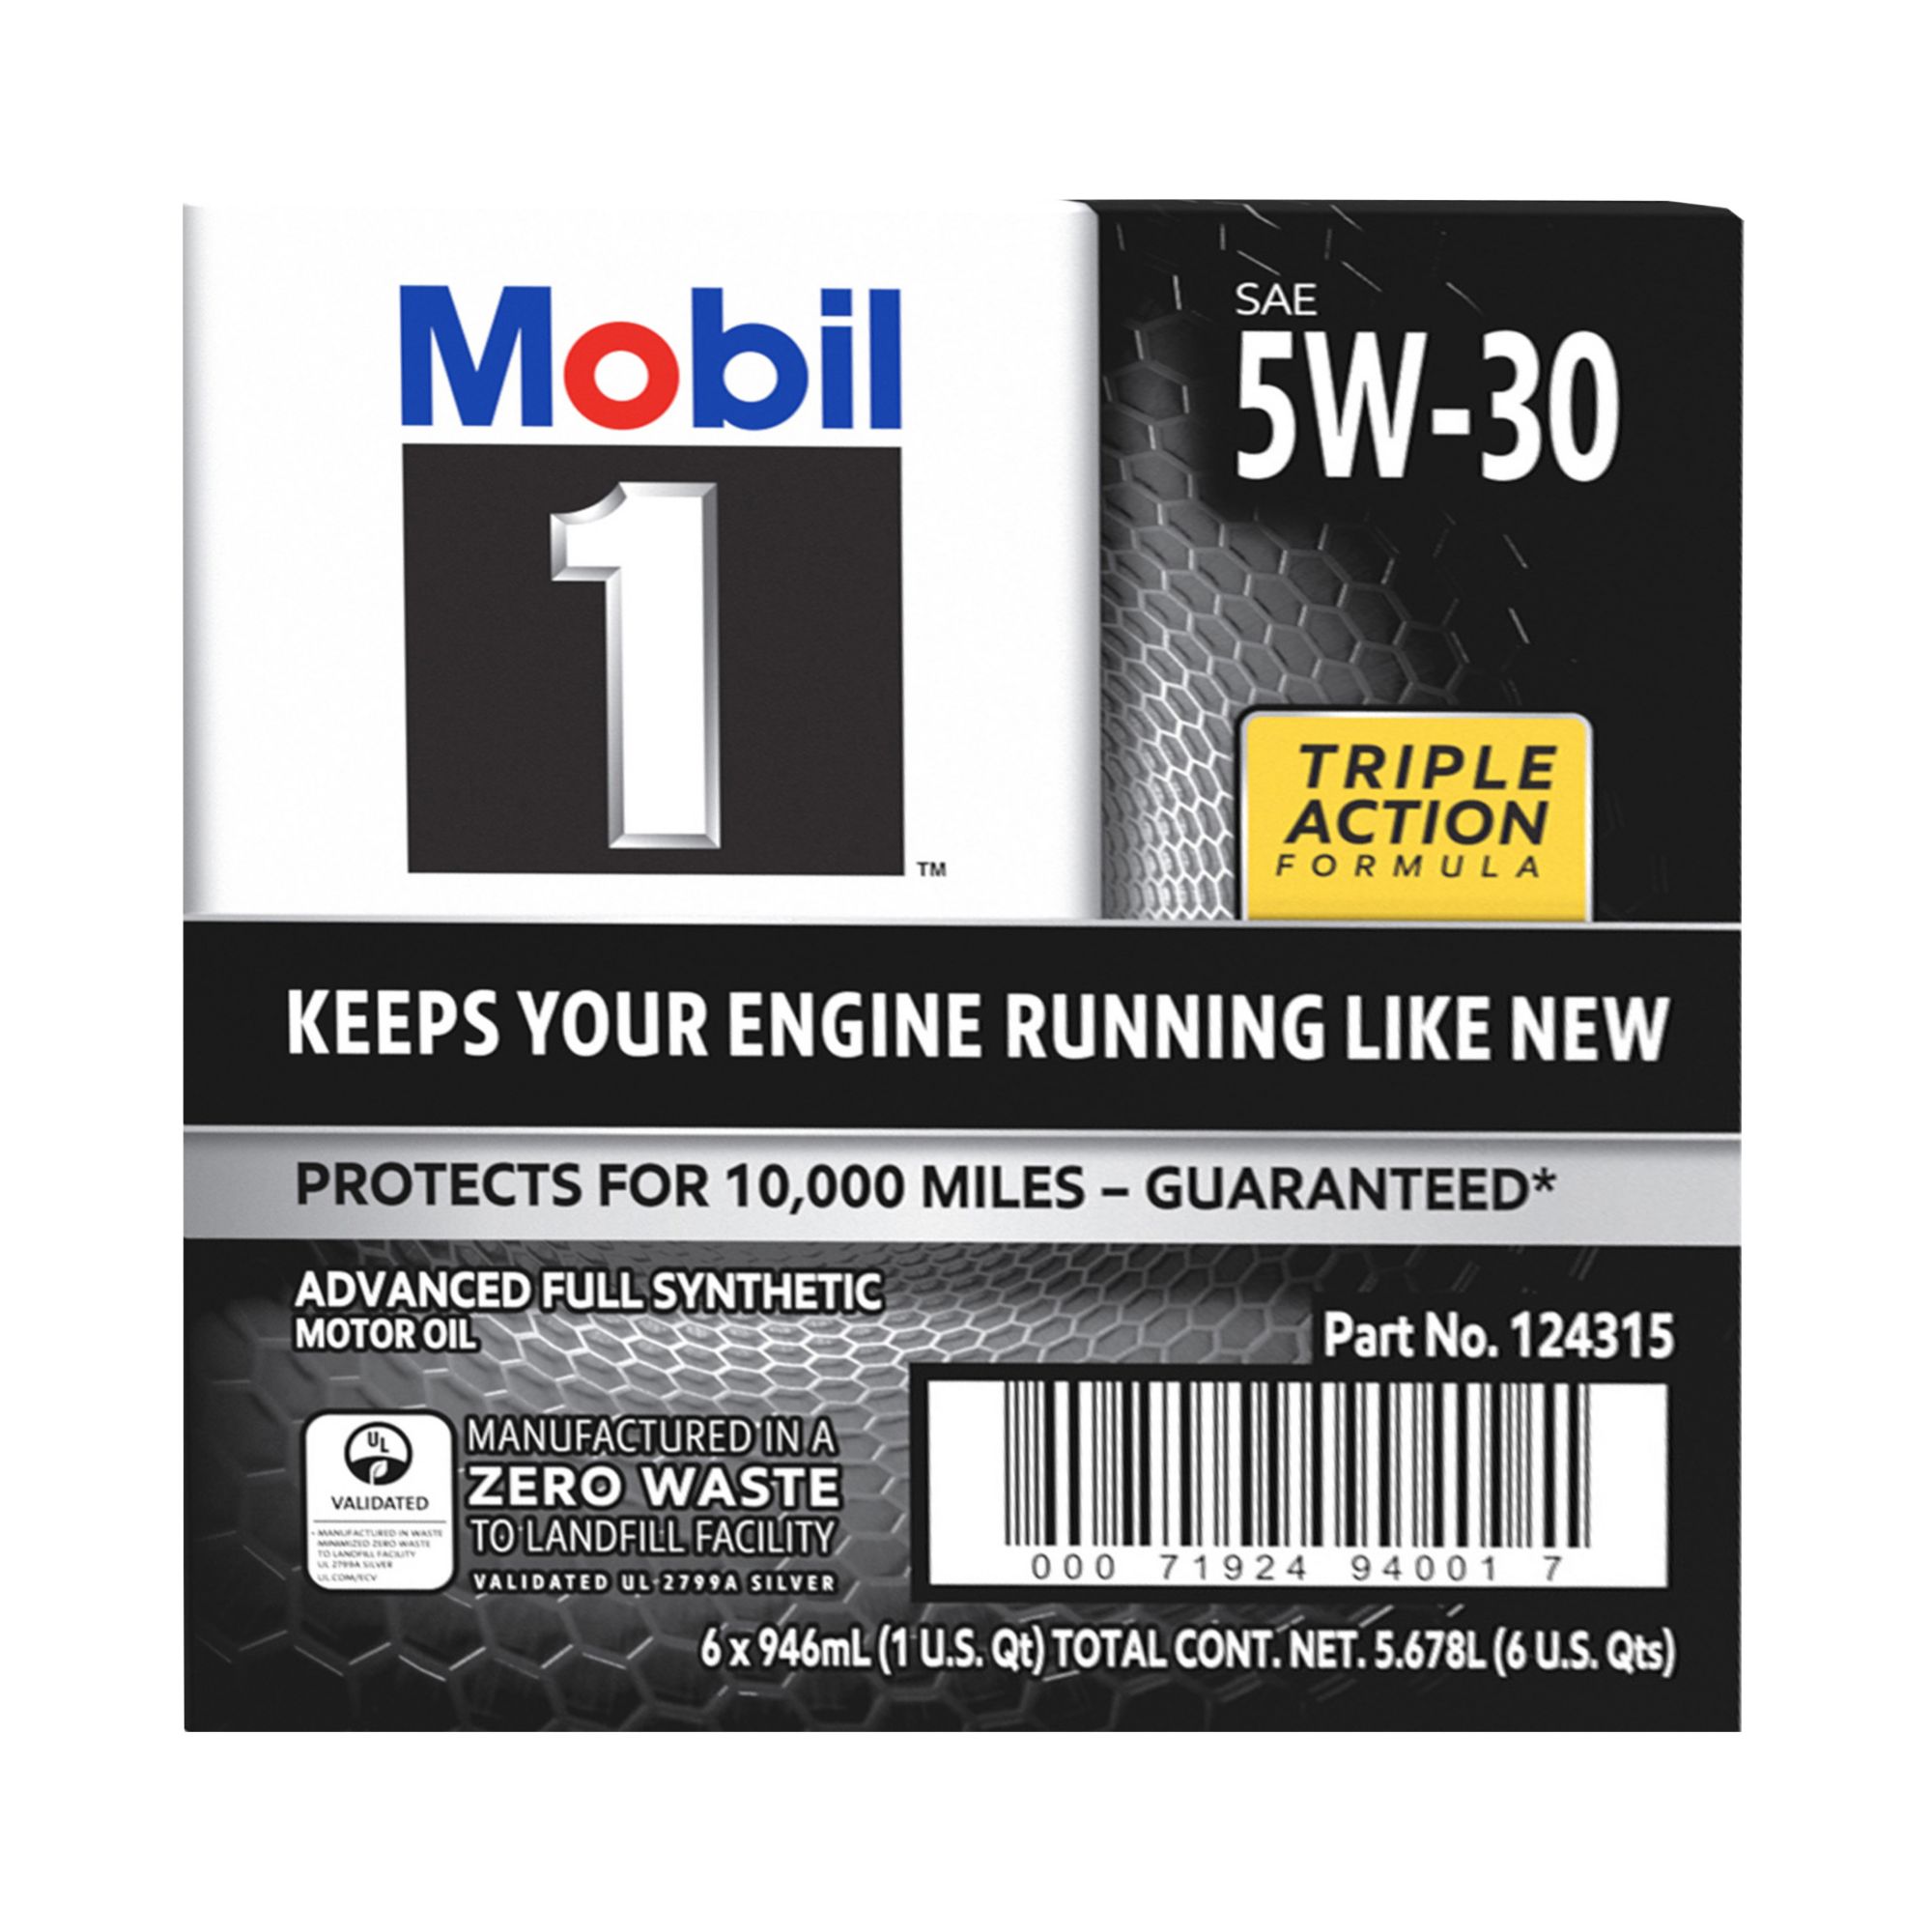 Mobil 1 5w-30 and Mobil 1 5w-30 Dexos2? Are there 2 different oils